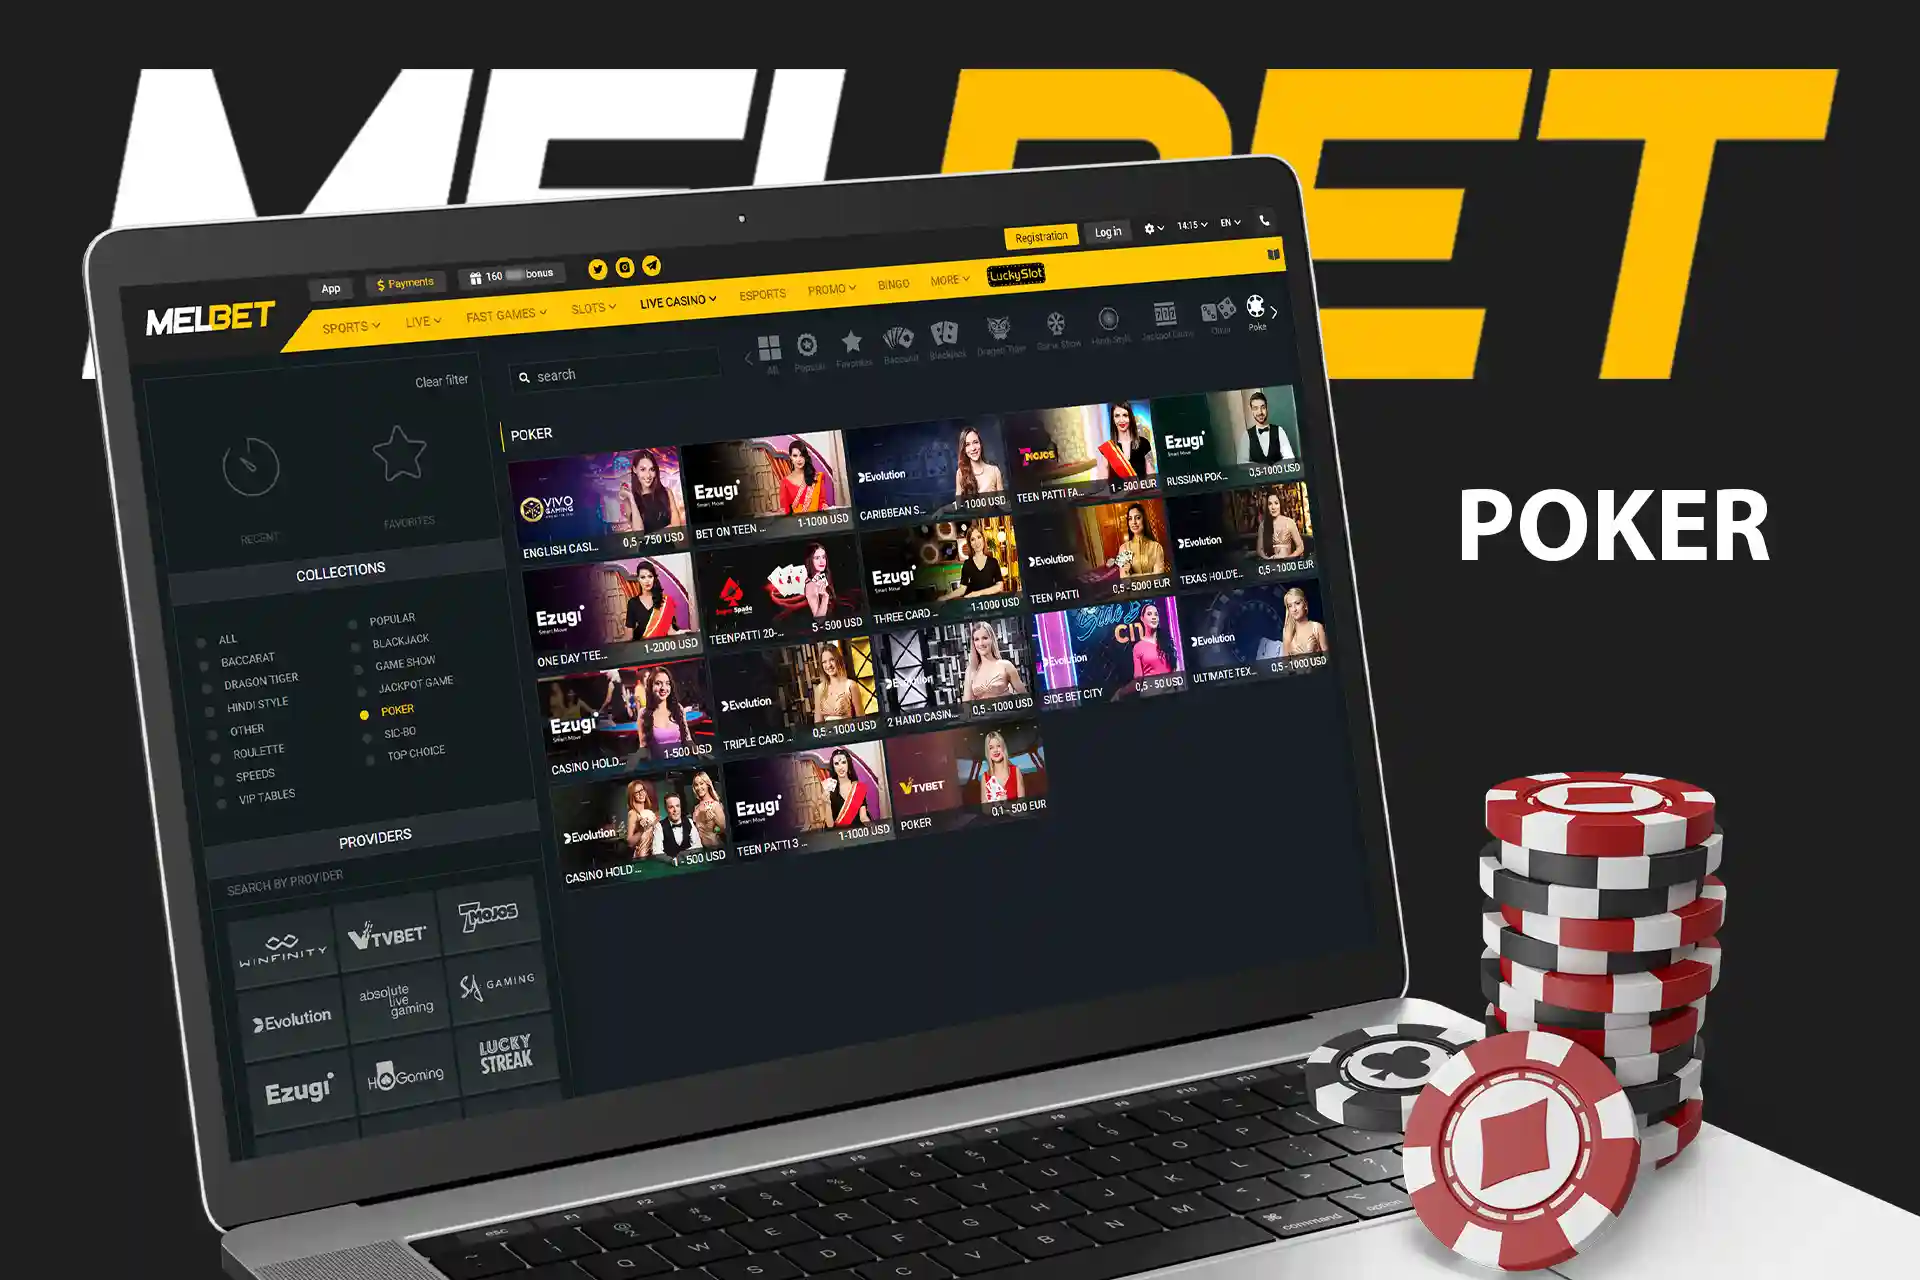 Play poker at Melbet casino and hone your skills.